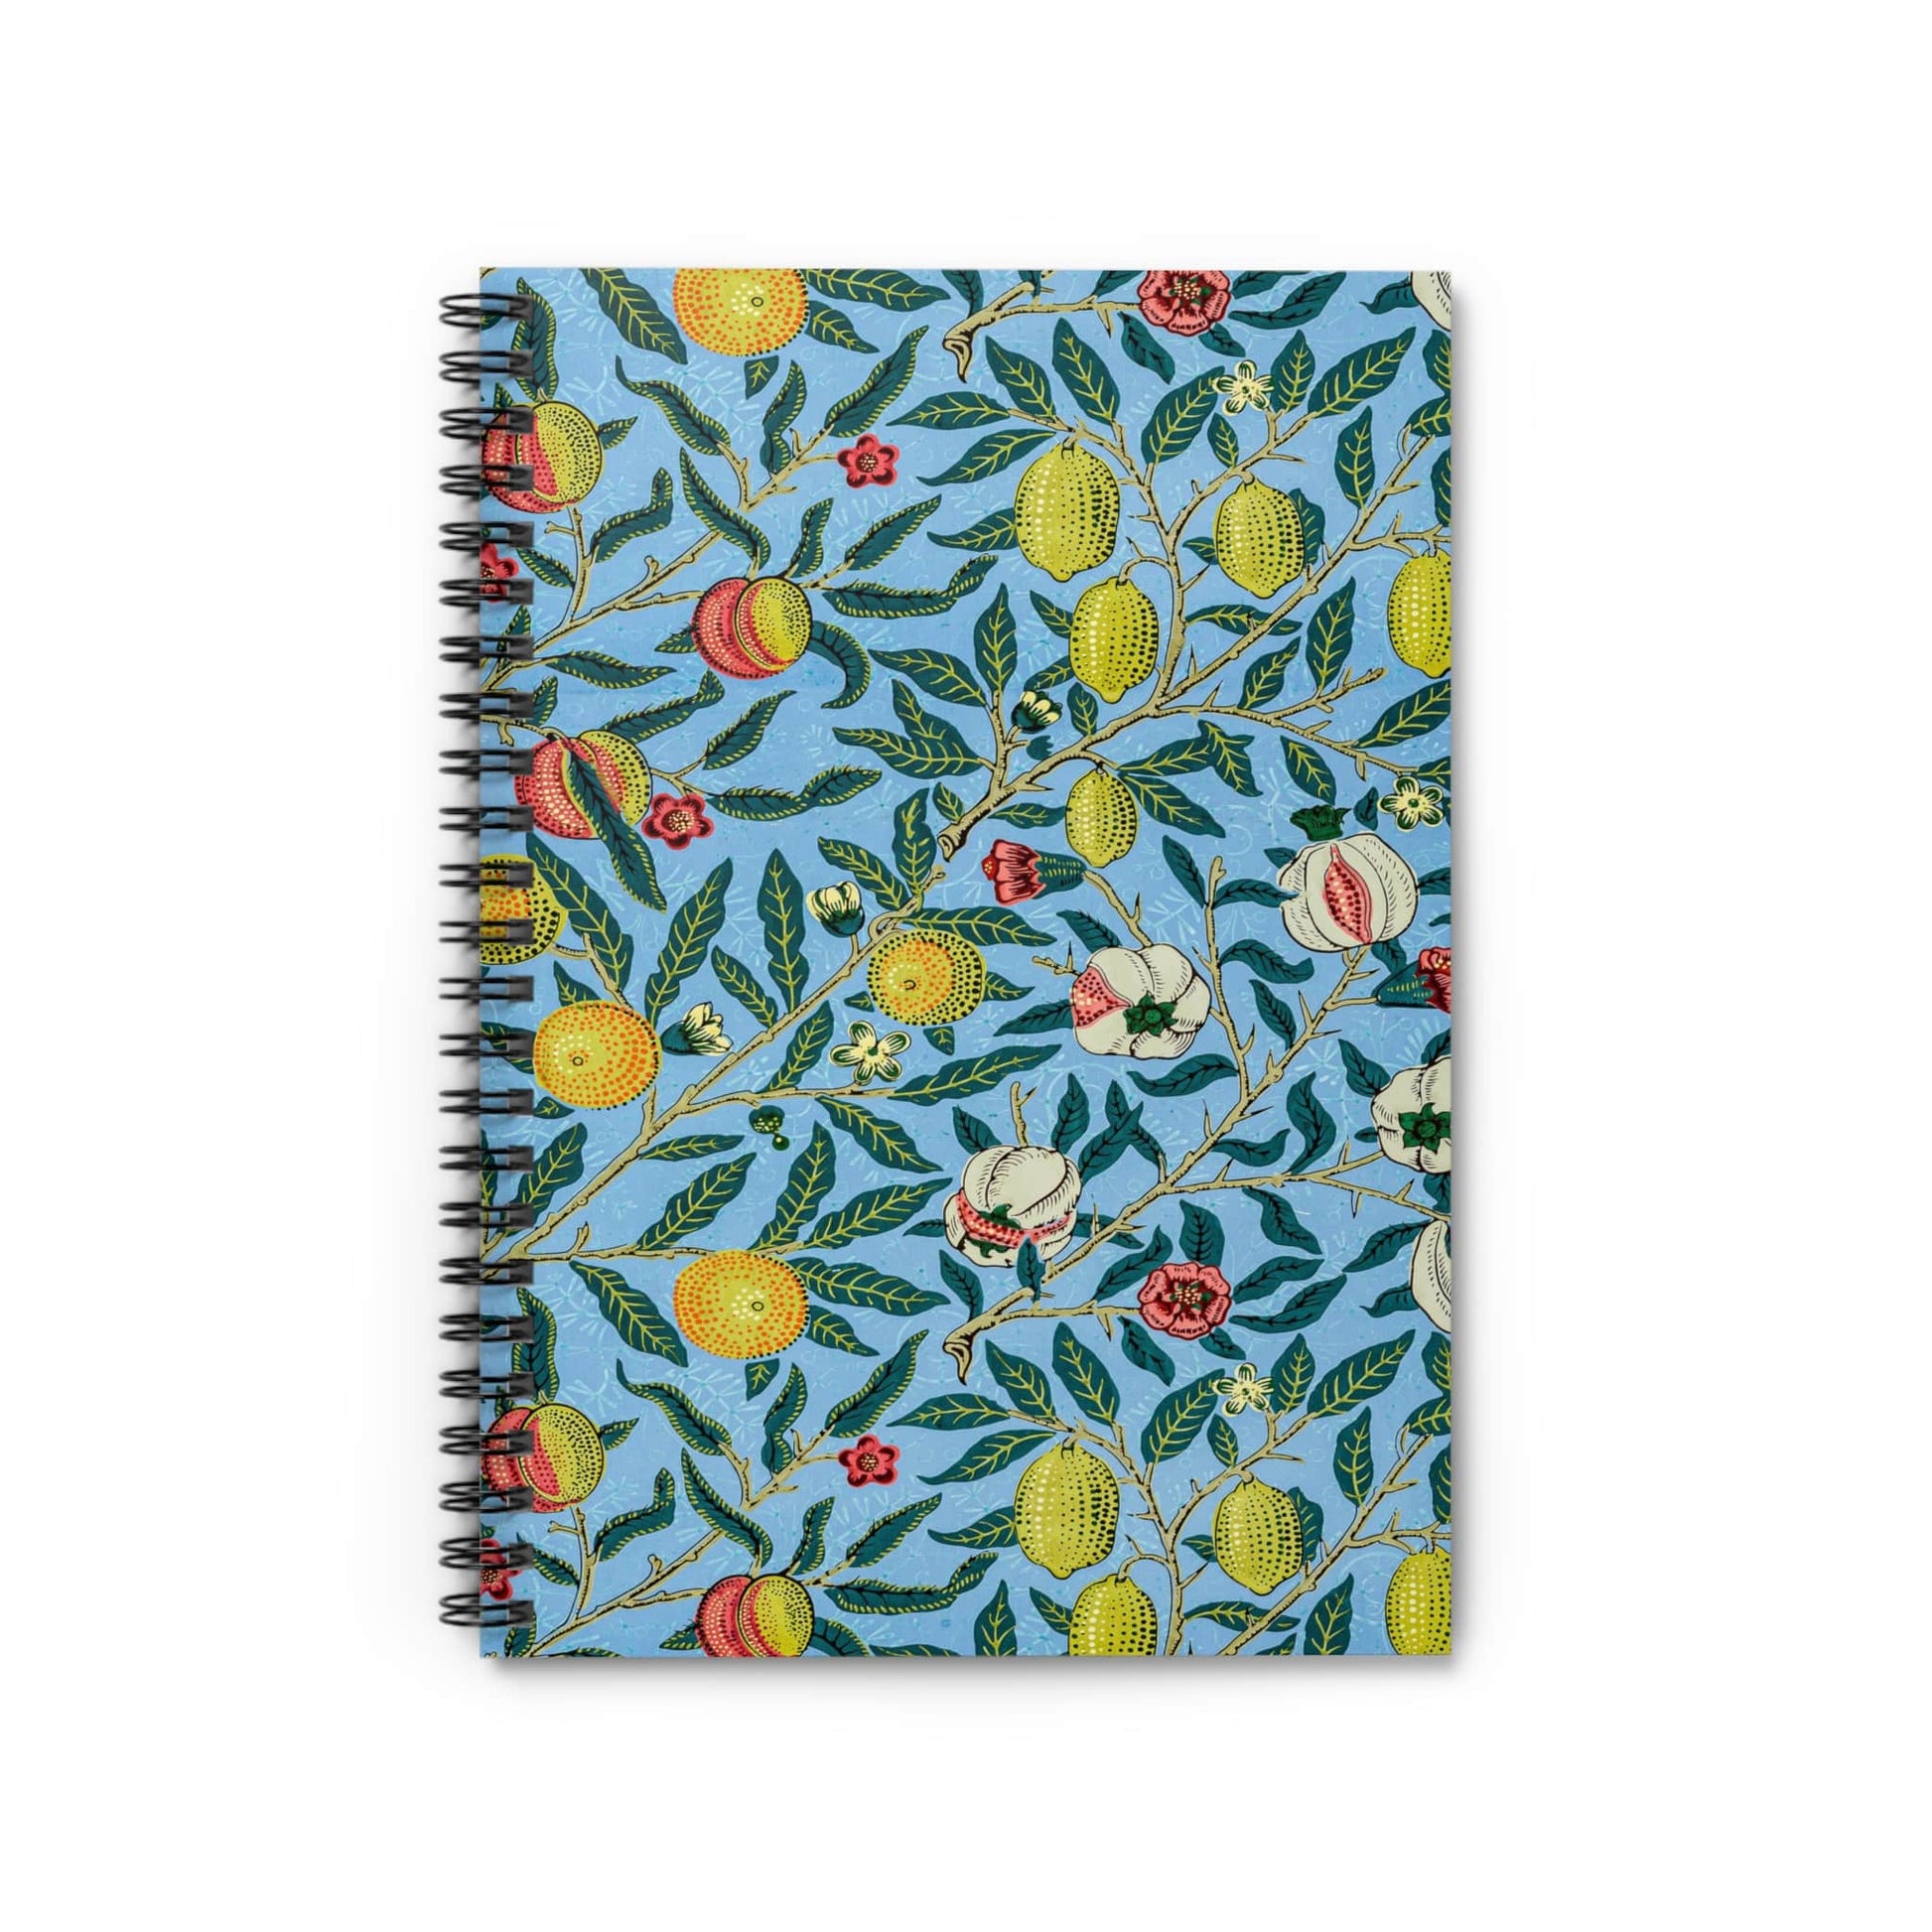 Eclectic Plants Notebook with William Morris cover, perfect for journaling and planning, featuring eclectic plant designs by William Morris.